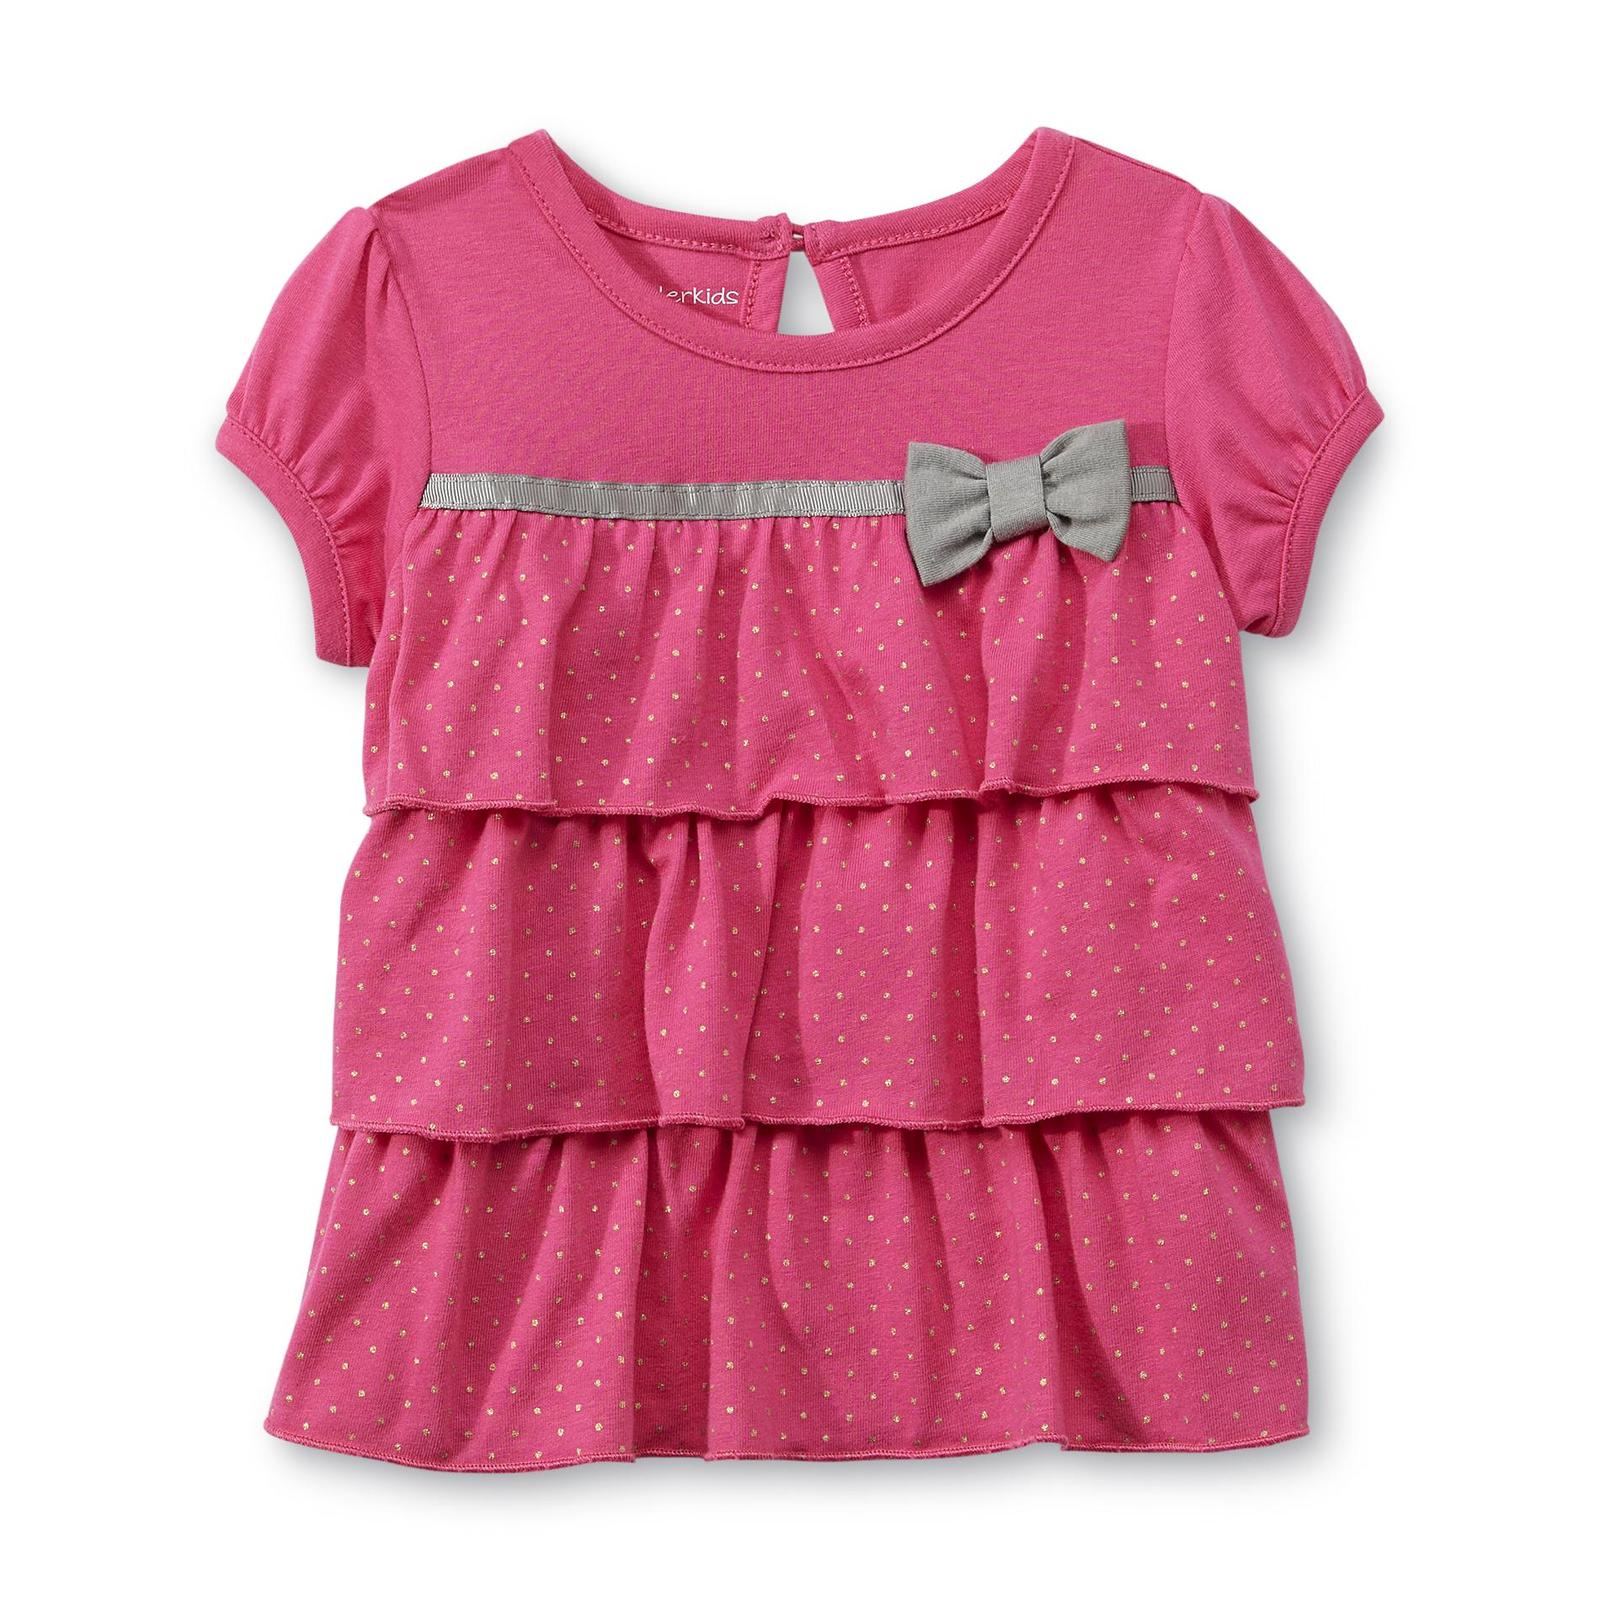 WonderKids Infant & Toddler Girl's Tiered Top - Dots